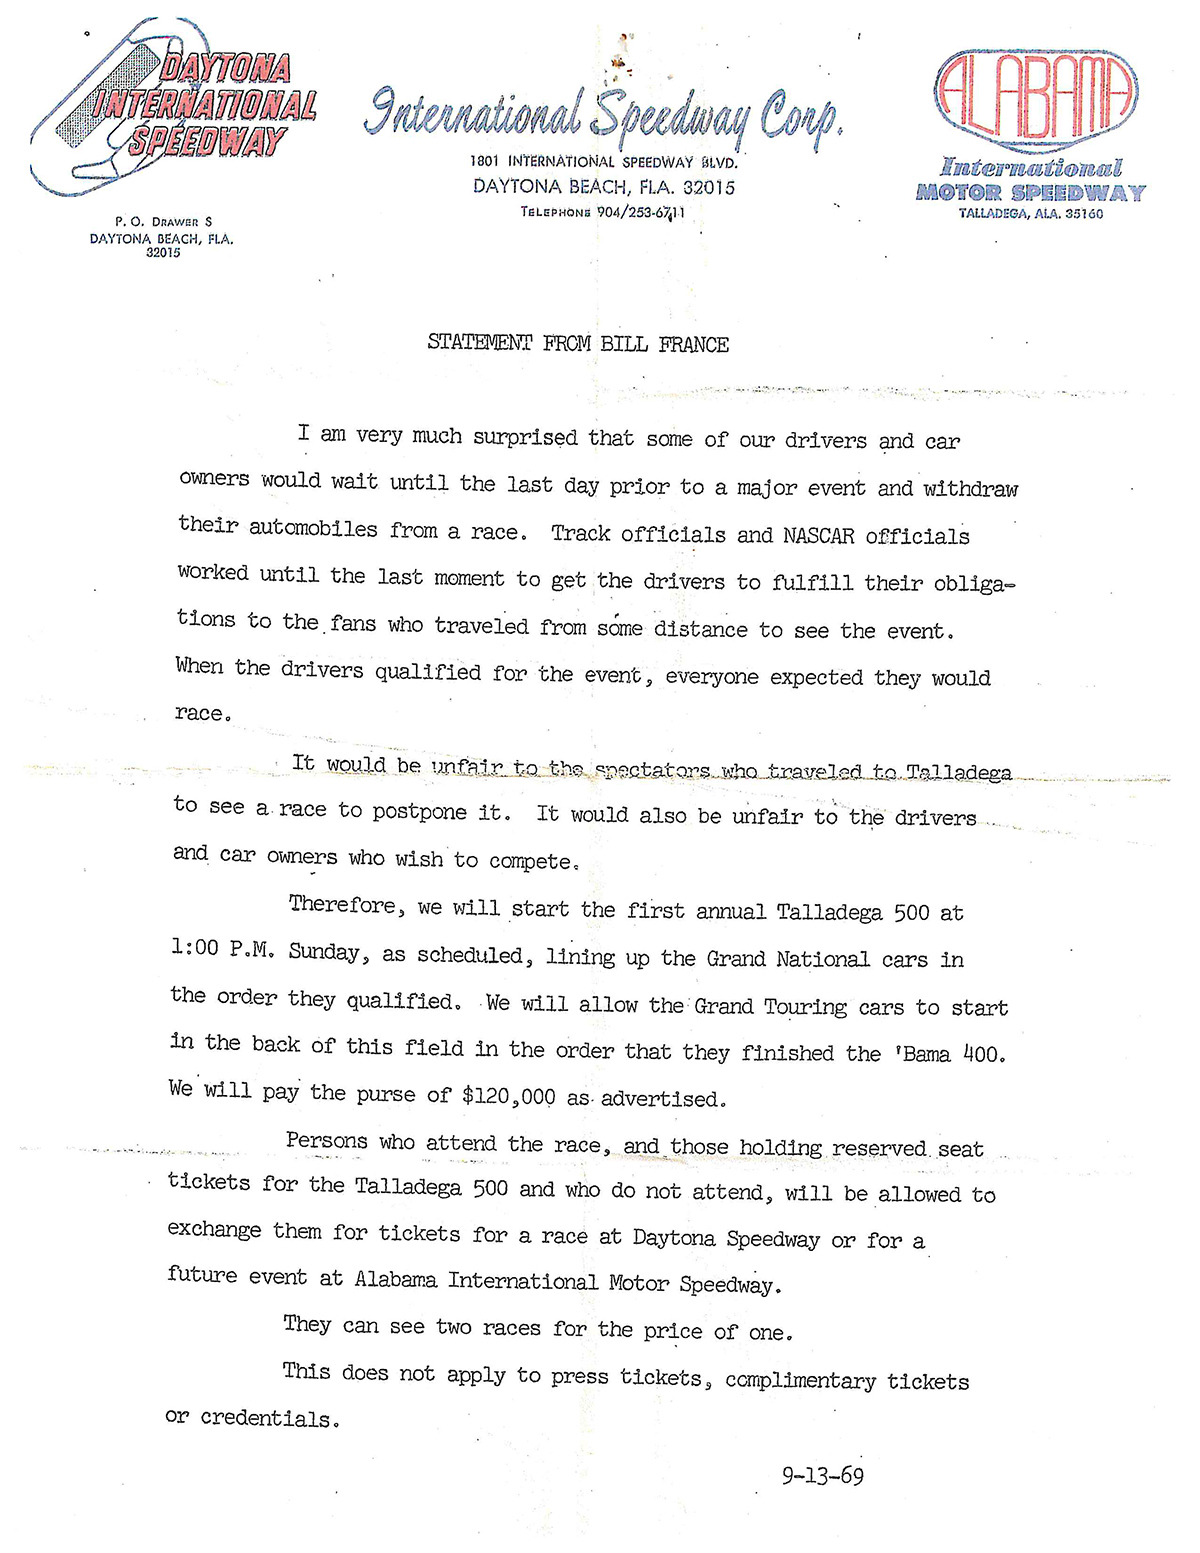 The statement issued to fans by Bill France Sr. on Sept. 13, 1969, after the driver walkout the day before the first Talladega 500 at what was then called Alabama International Motor Speedway. With the fans in mind, France was adamant there was going to be a race, and indeed there was. Today known as Talladega Superspeedway, the first racing weekend at the 2.66-mile venue took place on September 13-14, 1969. NASCAR’s biggest track celebrates its 50th Anniversary this year. 